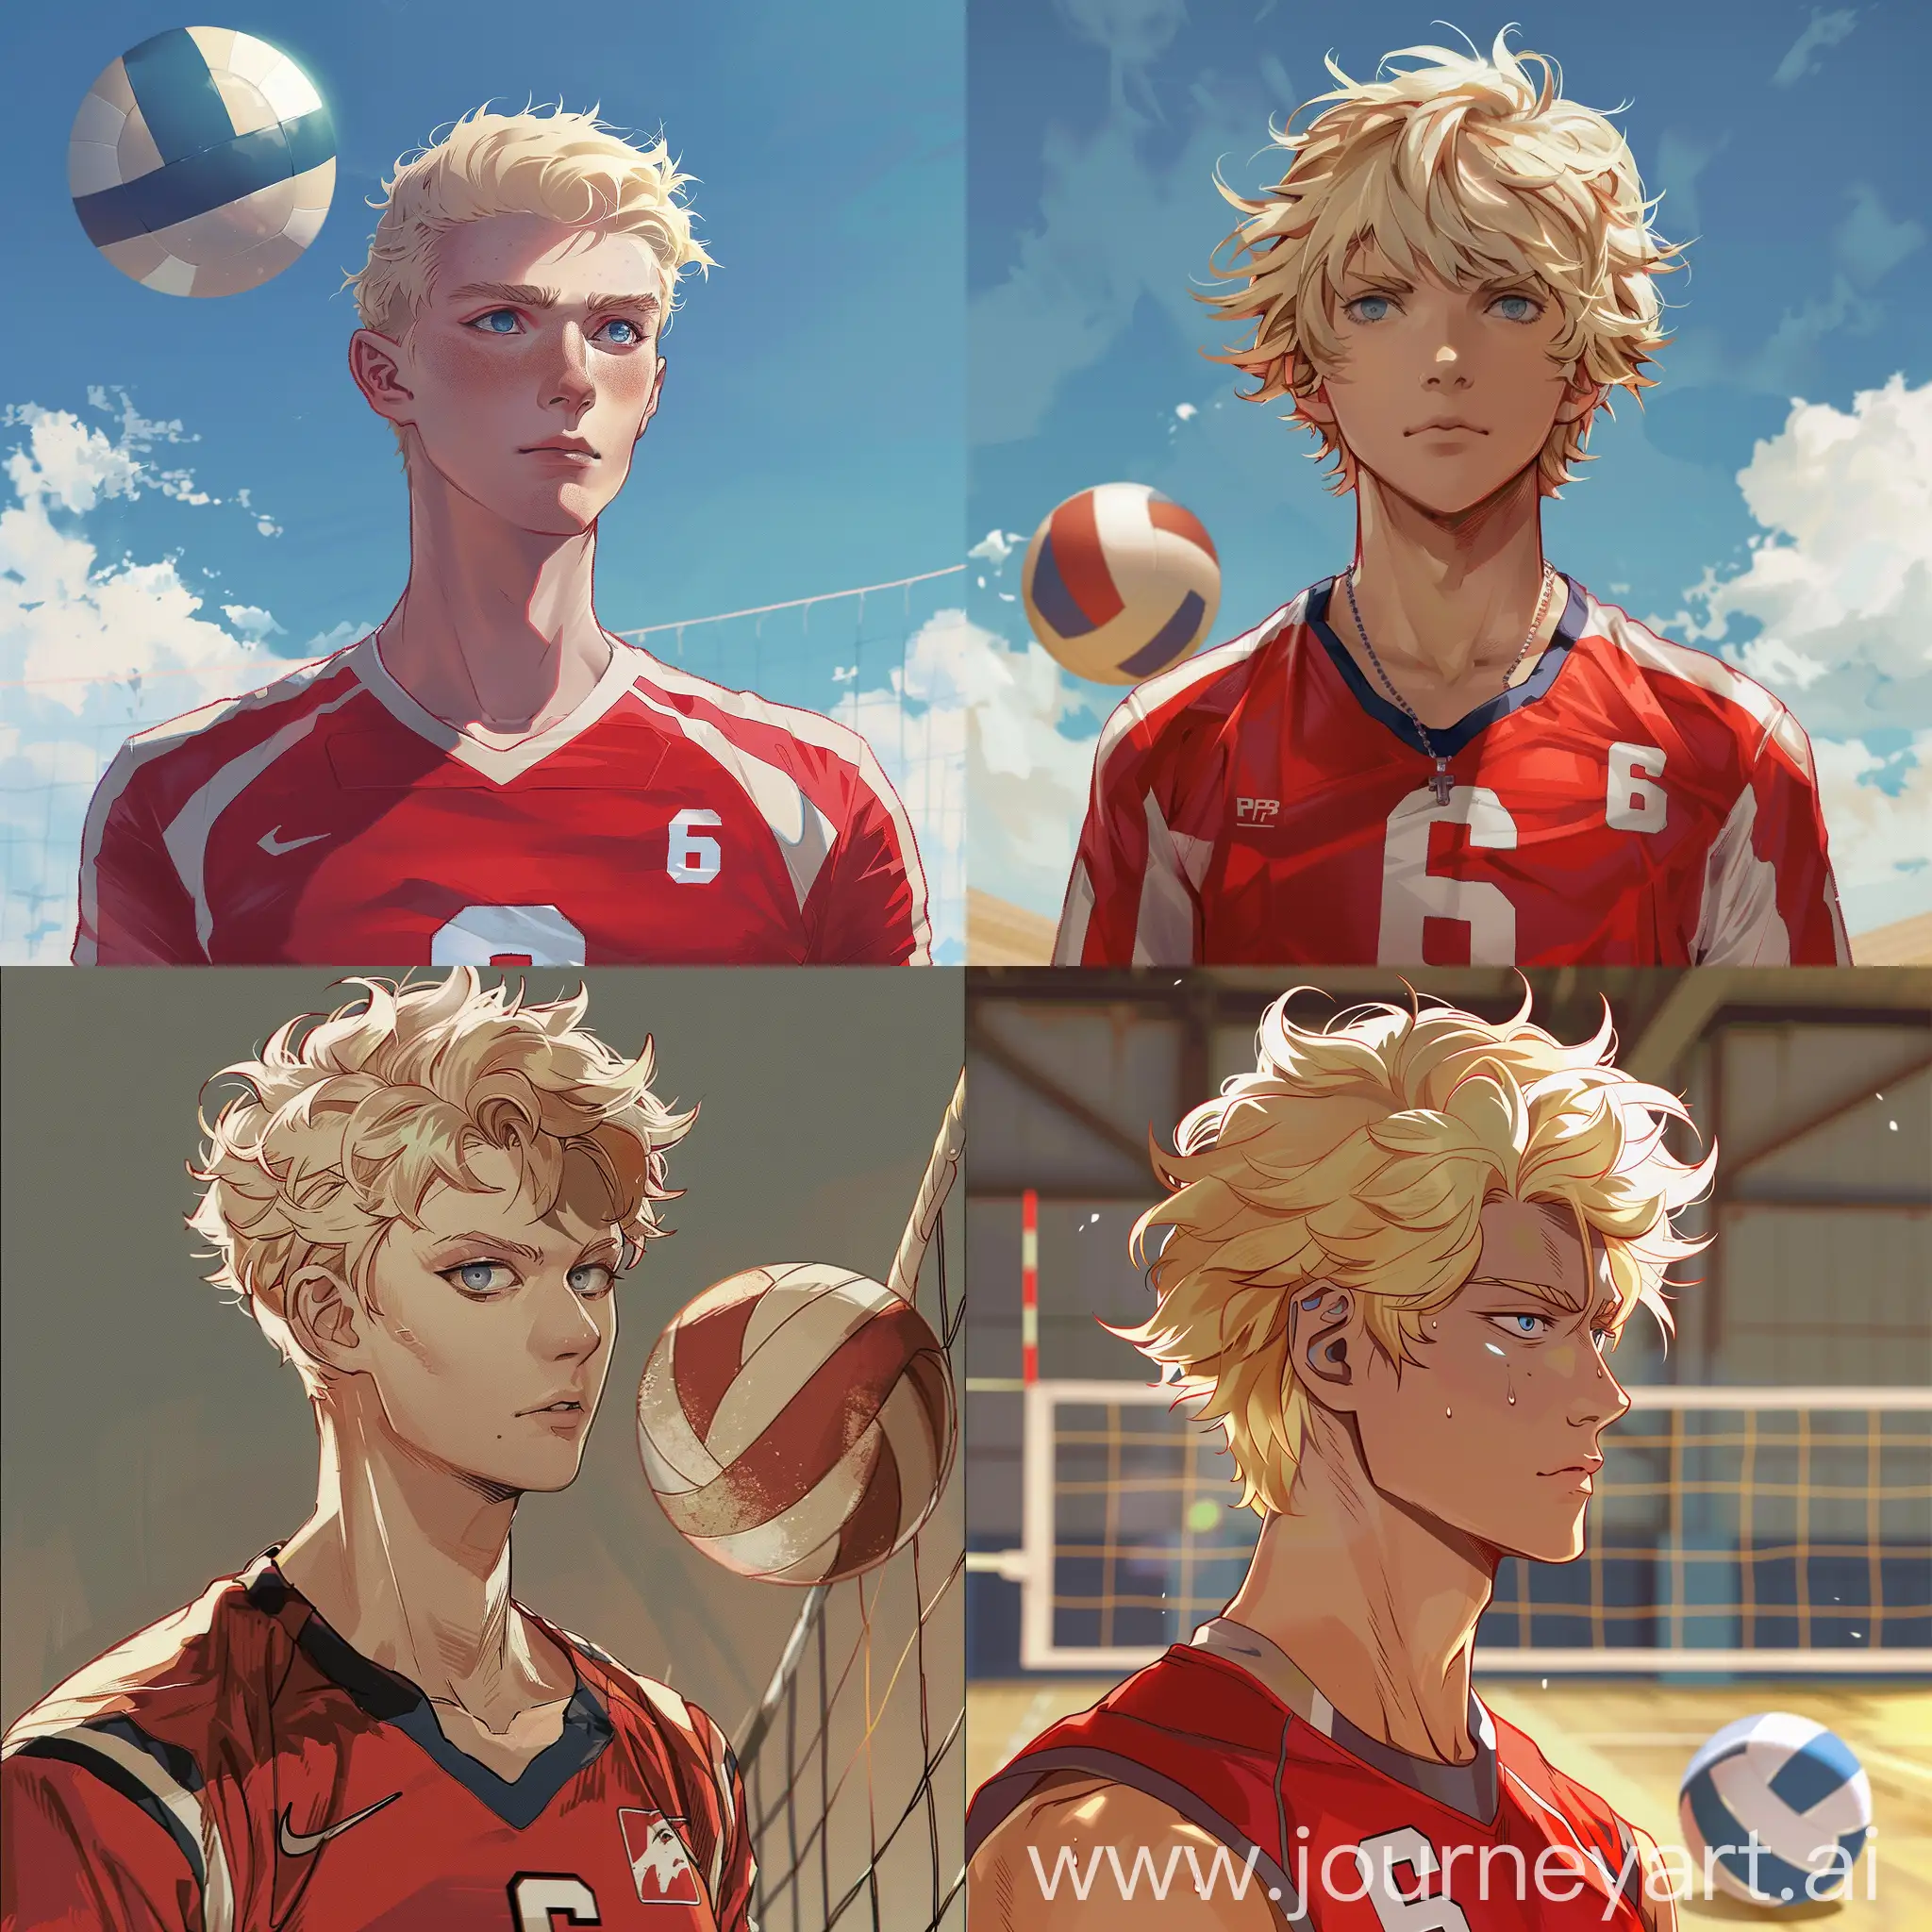 A 169 - foot - tall boy with blond hair . He has heterochromia. One eye is icy blue and the other is dark brown. He is wearing a red and white volleyball uniform with the number 6. He is alone on the volleyball field and next to him is a volleyball ball